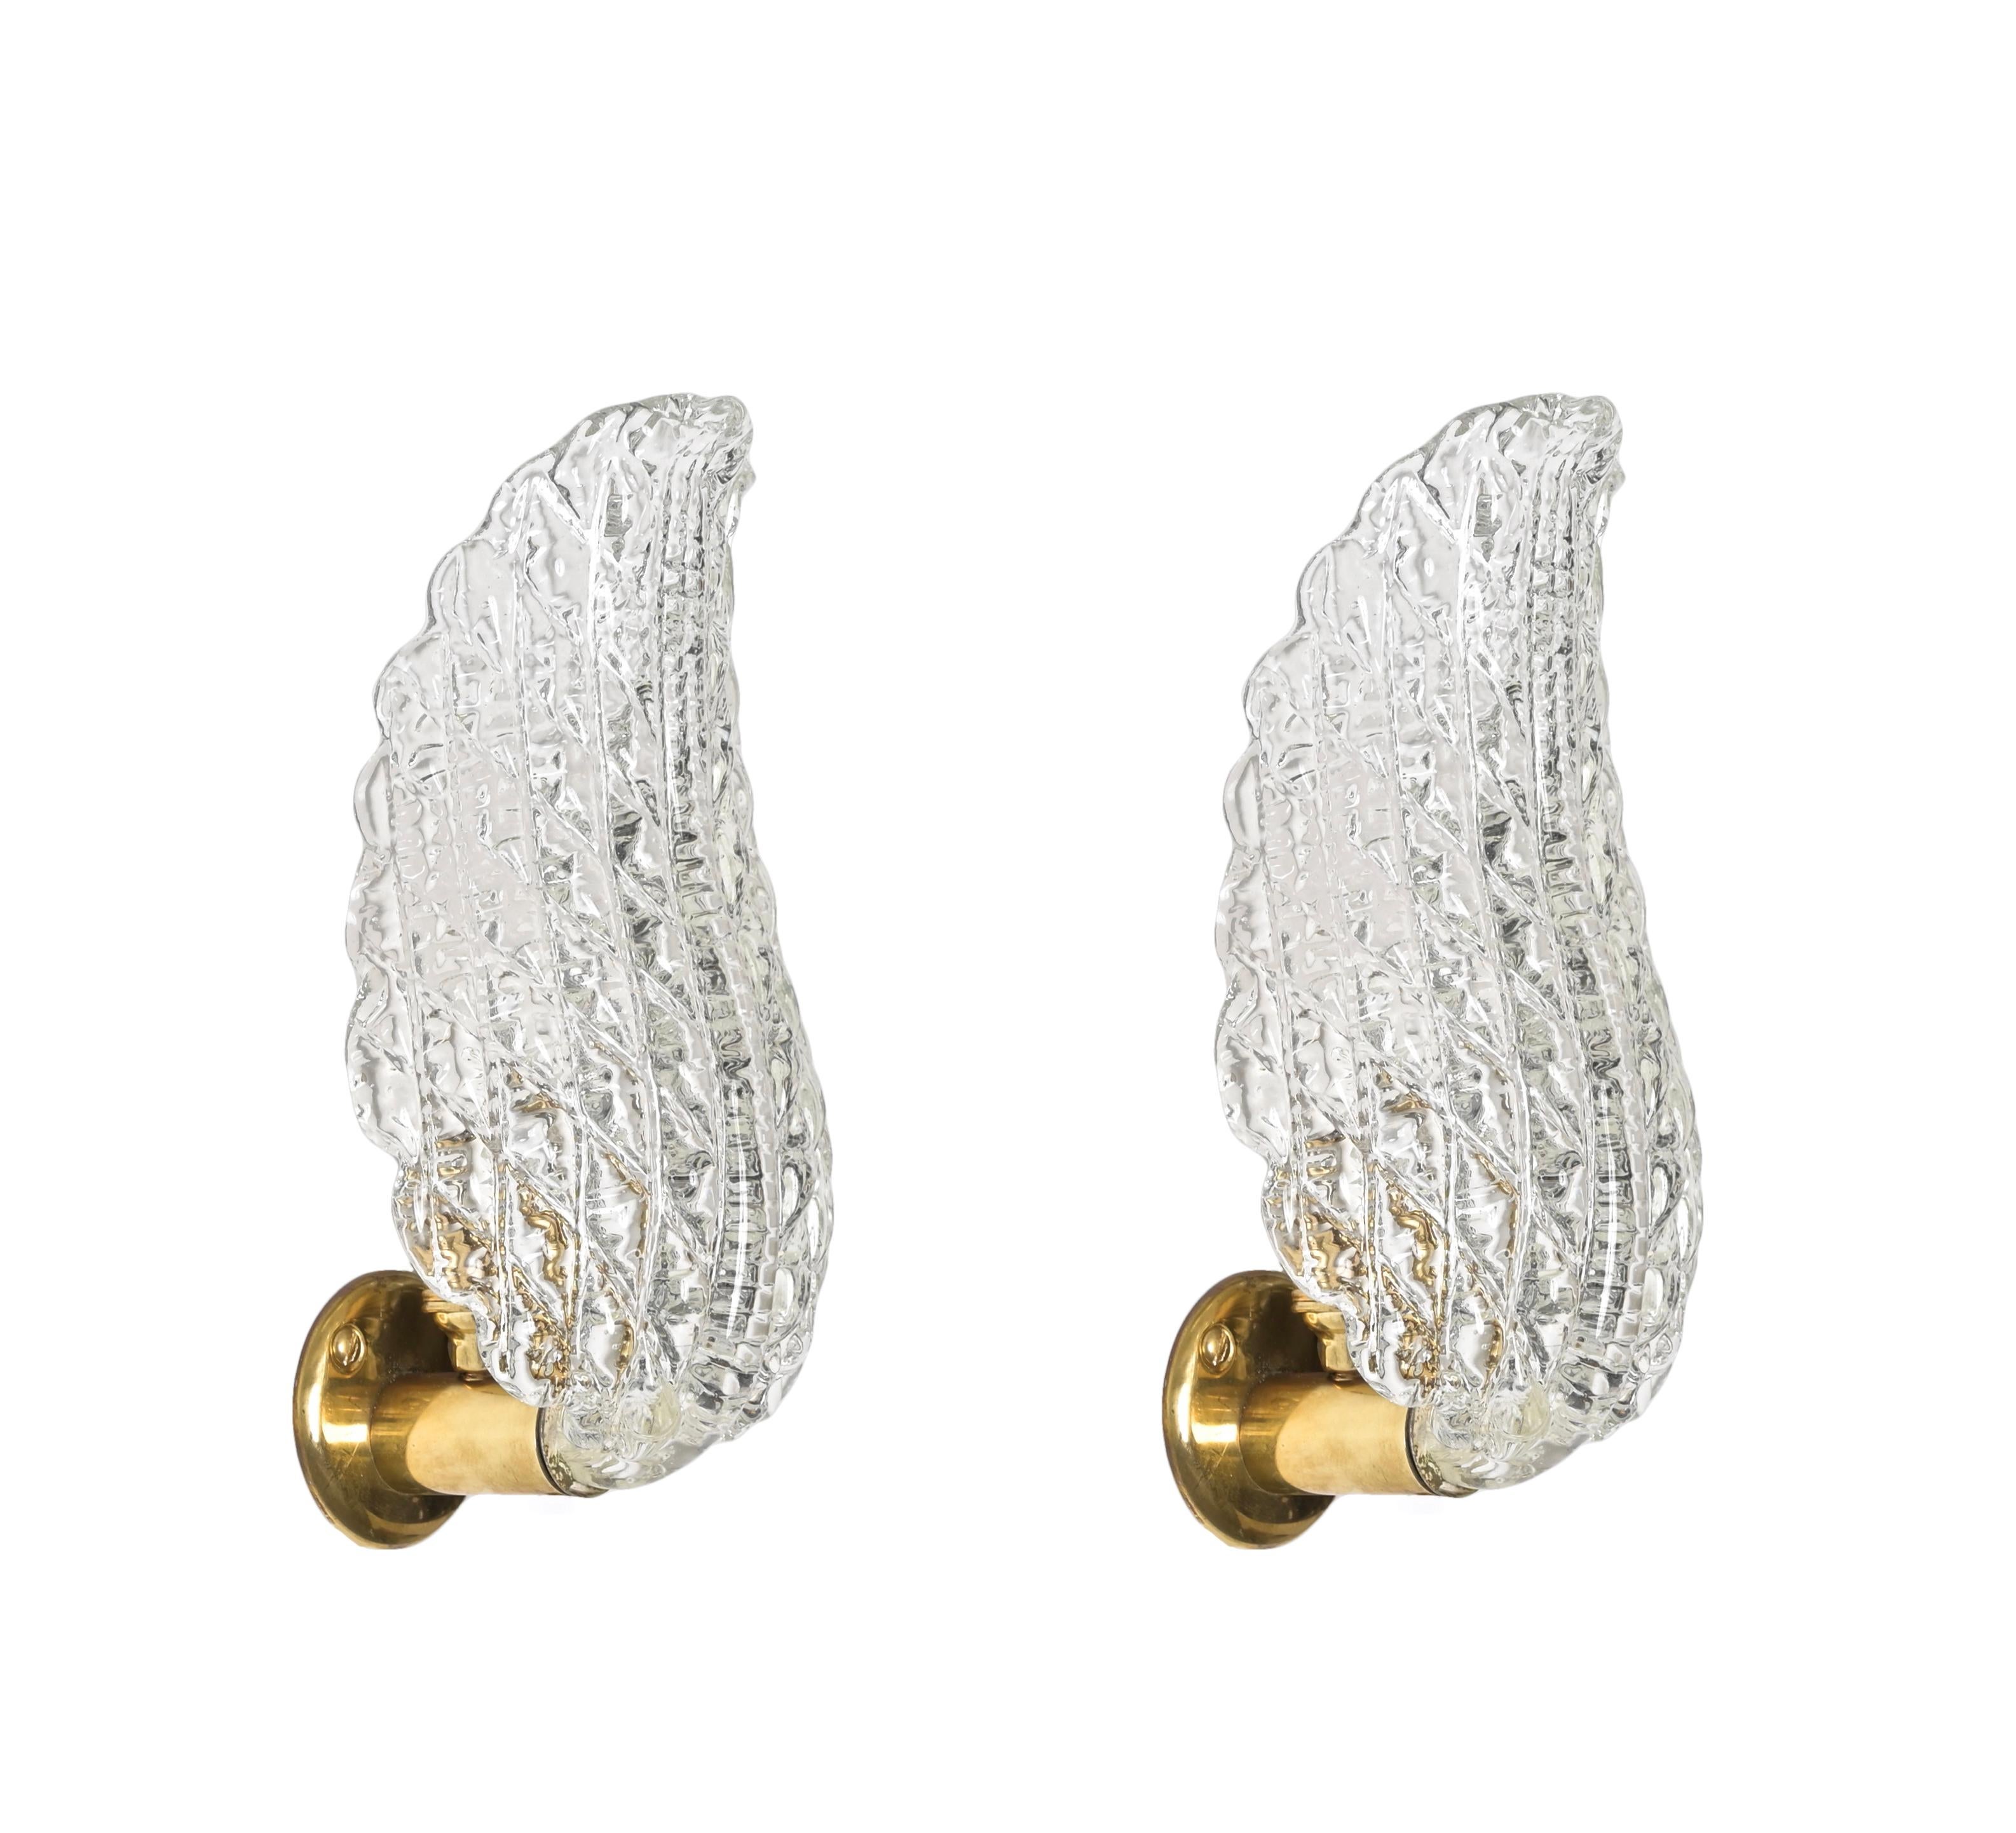 Pair of Midcentury Murano Glass and Brass Leaf Sconces, by Barovier, Italy 1950s For Sale 9